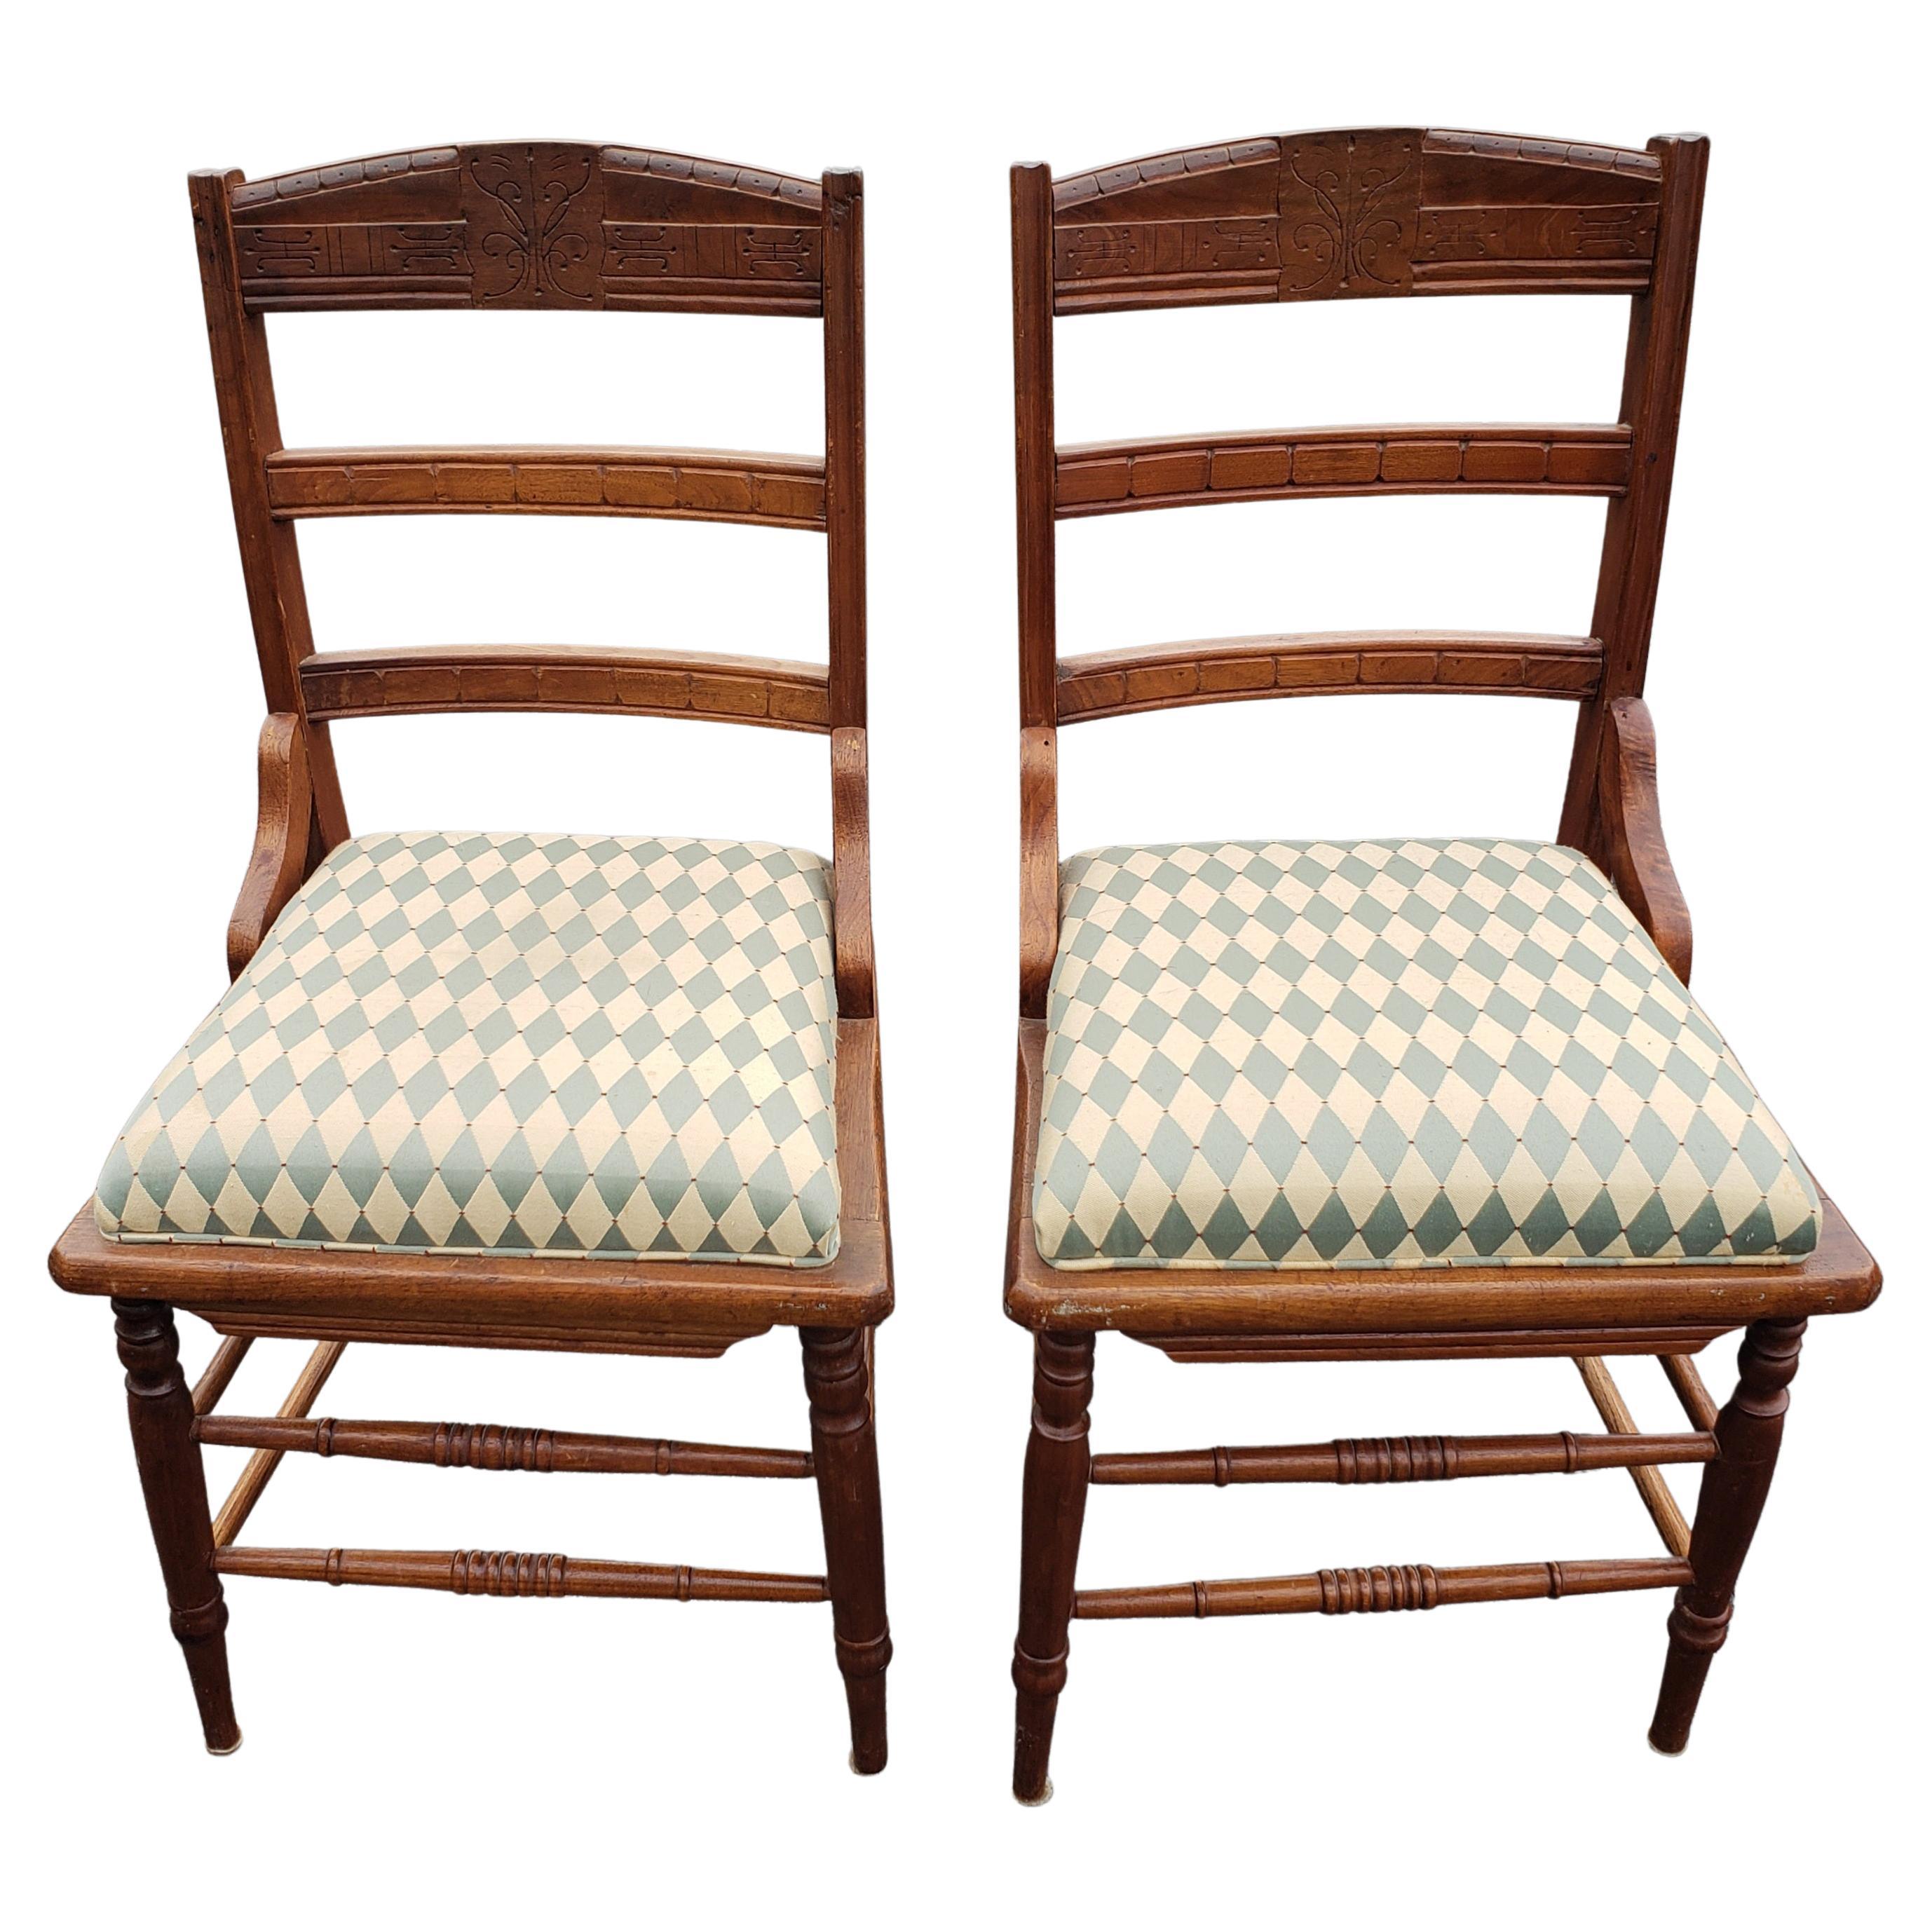 Stuning pair of Eastlake Victorian maple side chairs. Professionally Re-Upholstered with a very fine fabric of gold and turquoise colors on raised seats. Very comfortable.
Very good condition.

W5050422.